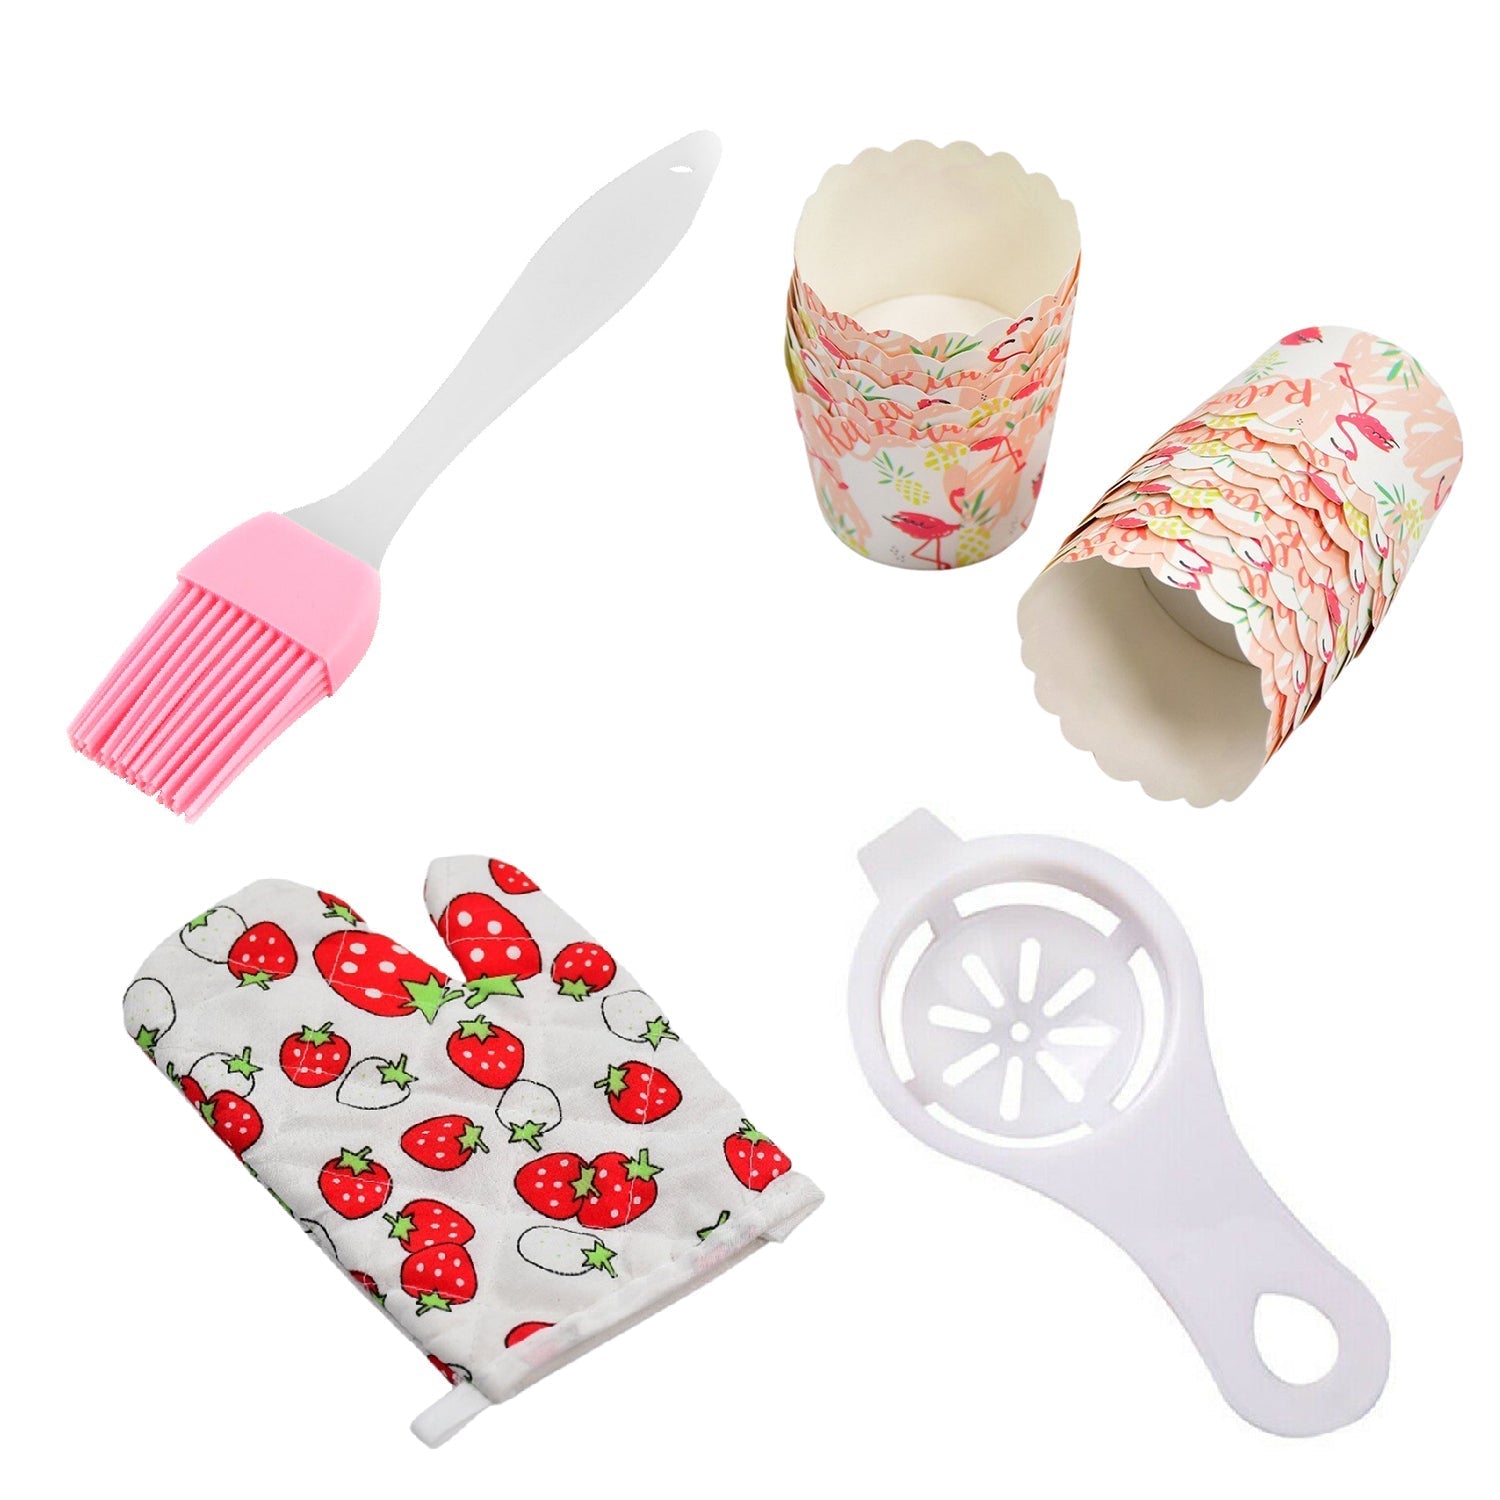 2943 4pc kitchen tools 1pc spatula brush 1pc oven glove 1pc egg yolk separator and paper cup set of 25pcs 